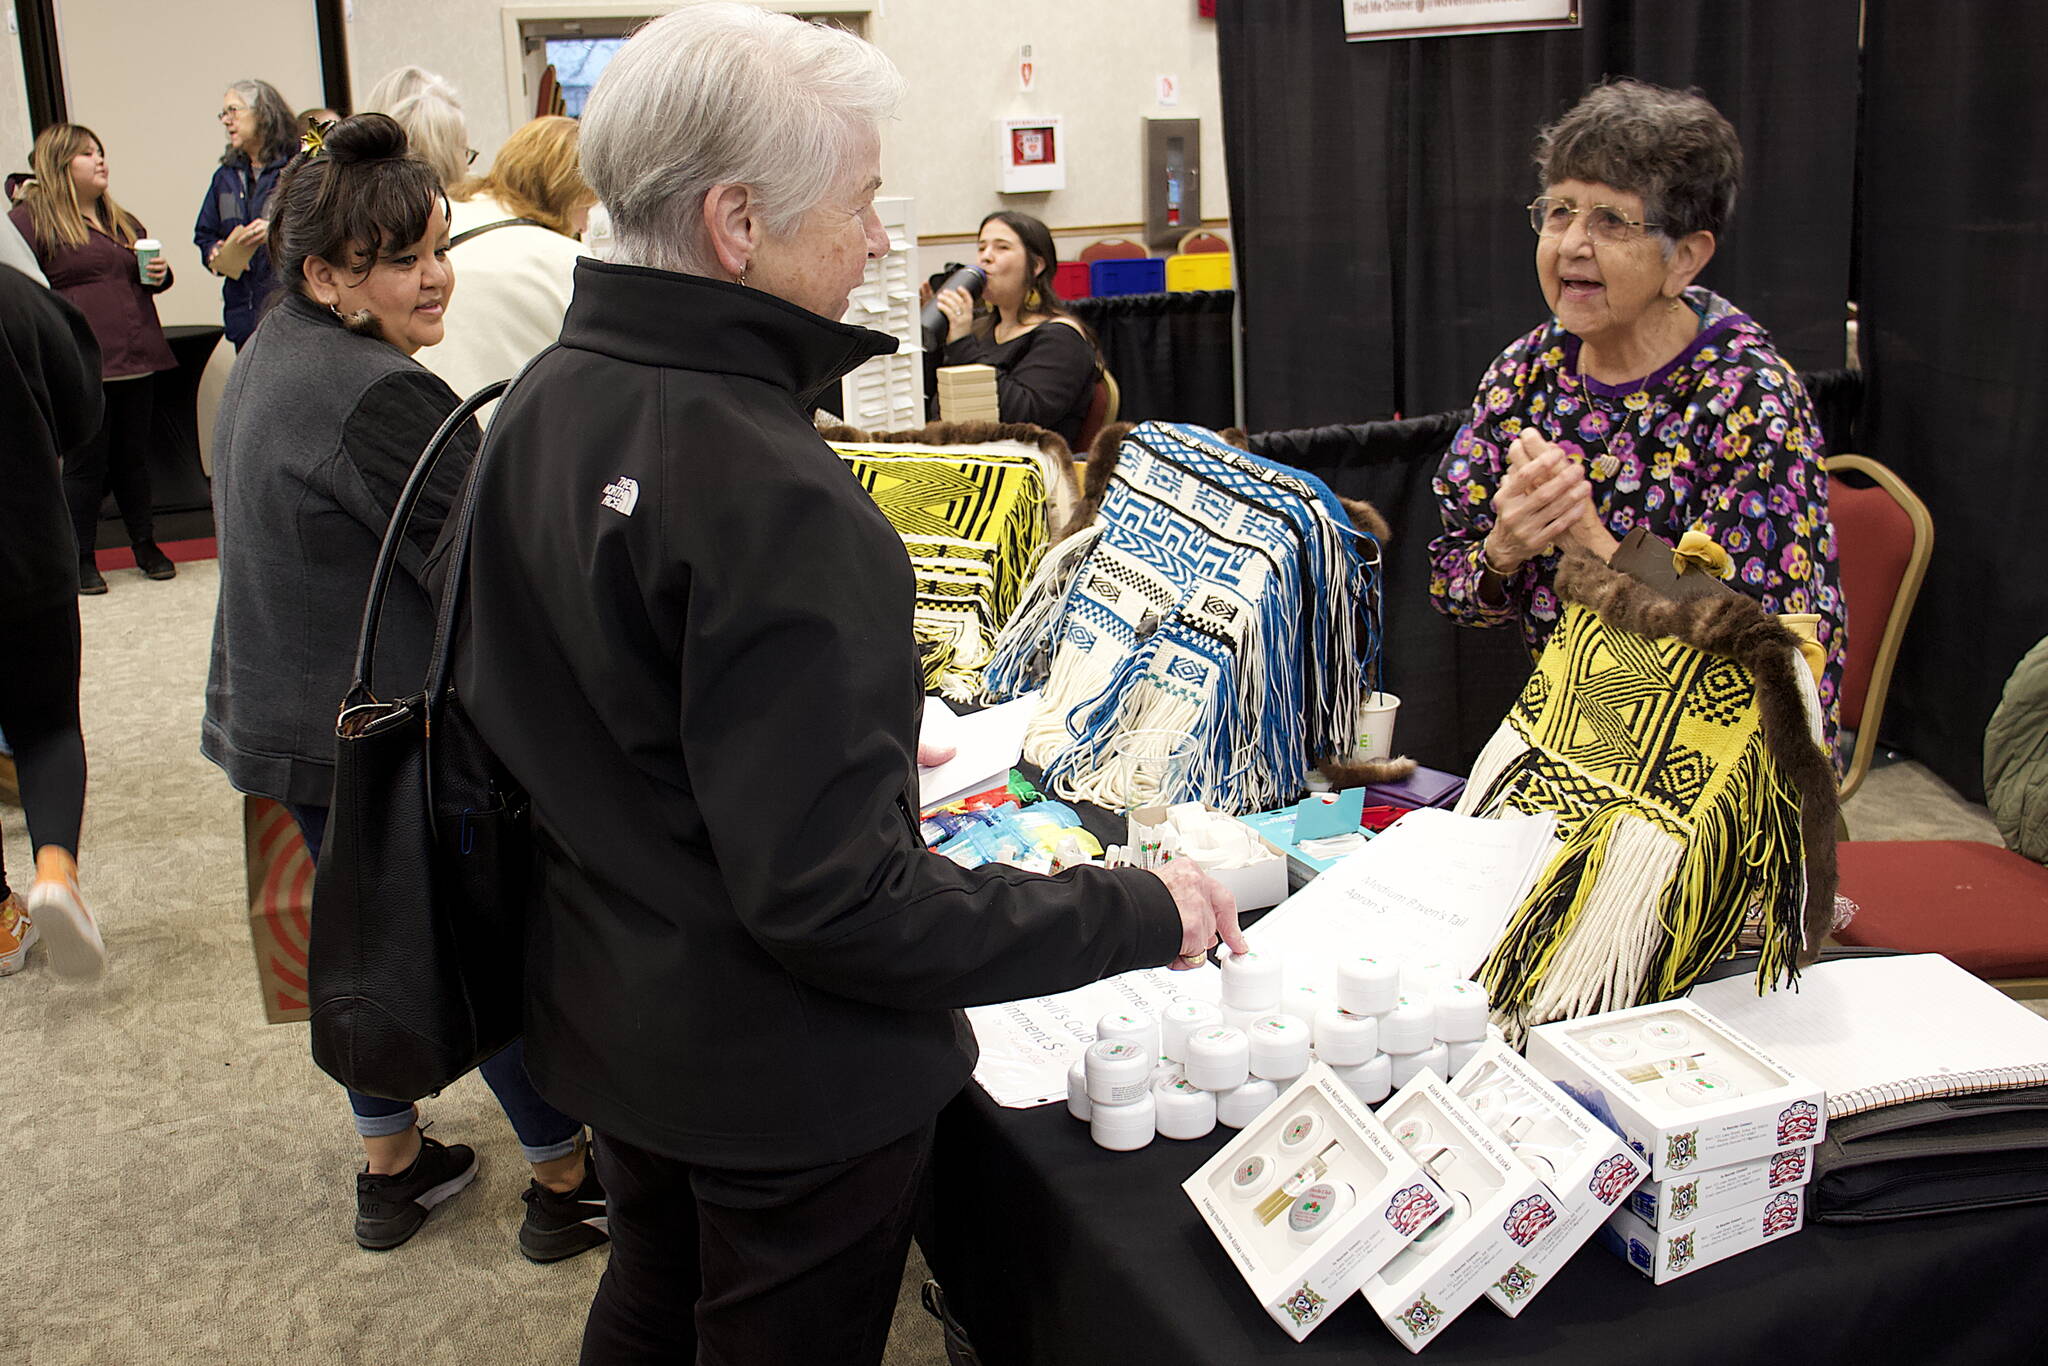 Ann Stepetin (left) and Marion Dau (center) talk to Pauline Duncan about her woven aprons and other items for sale at the Indigenous Artists & Vendors Holiday Market on Friday at Elizabeth Peratrovich Hall. The market and nearby Juneau Public Market continue through Sunday. (Mark Sabbatini / Juneau Empire)